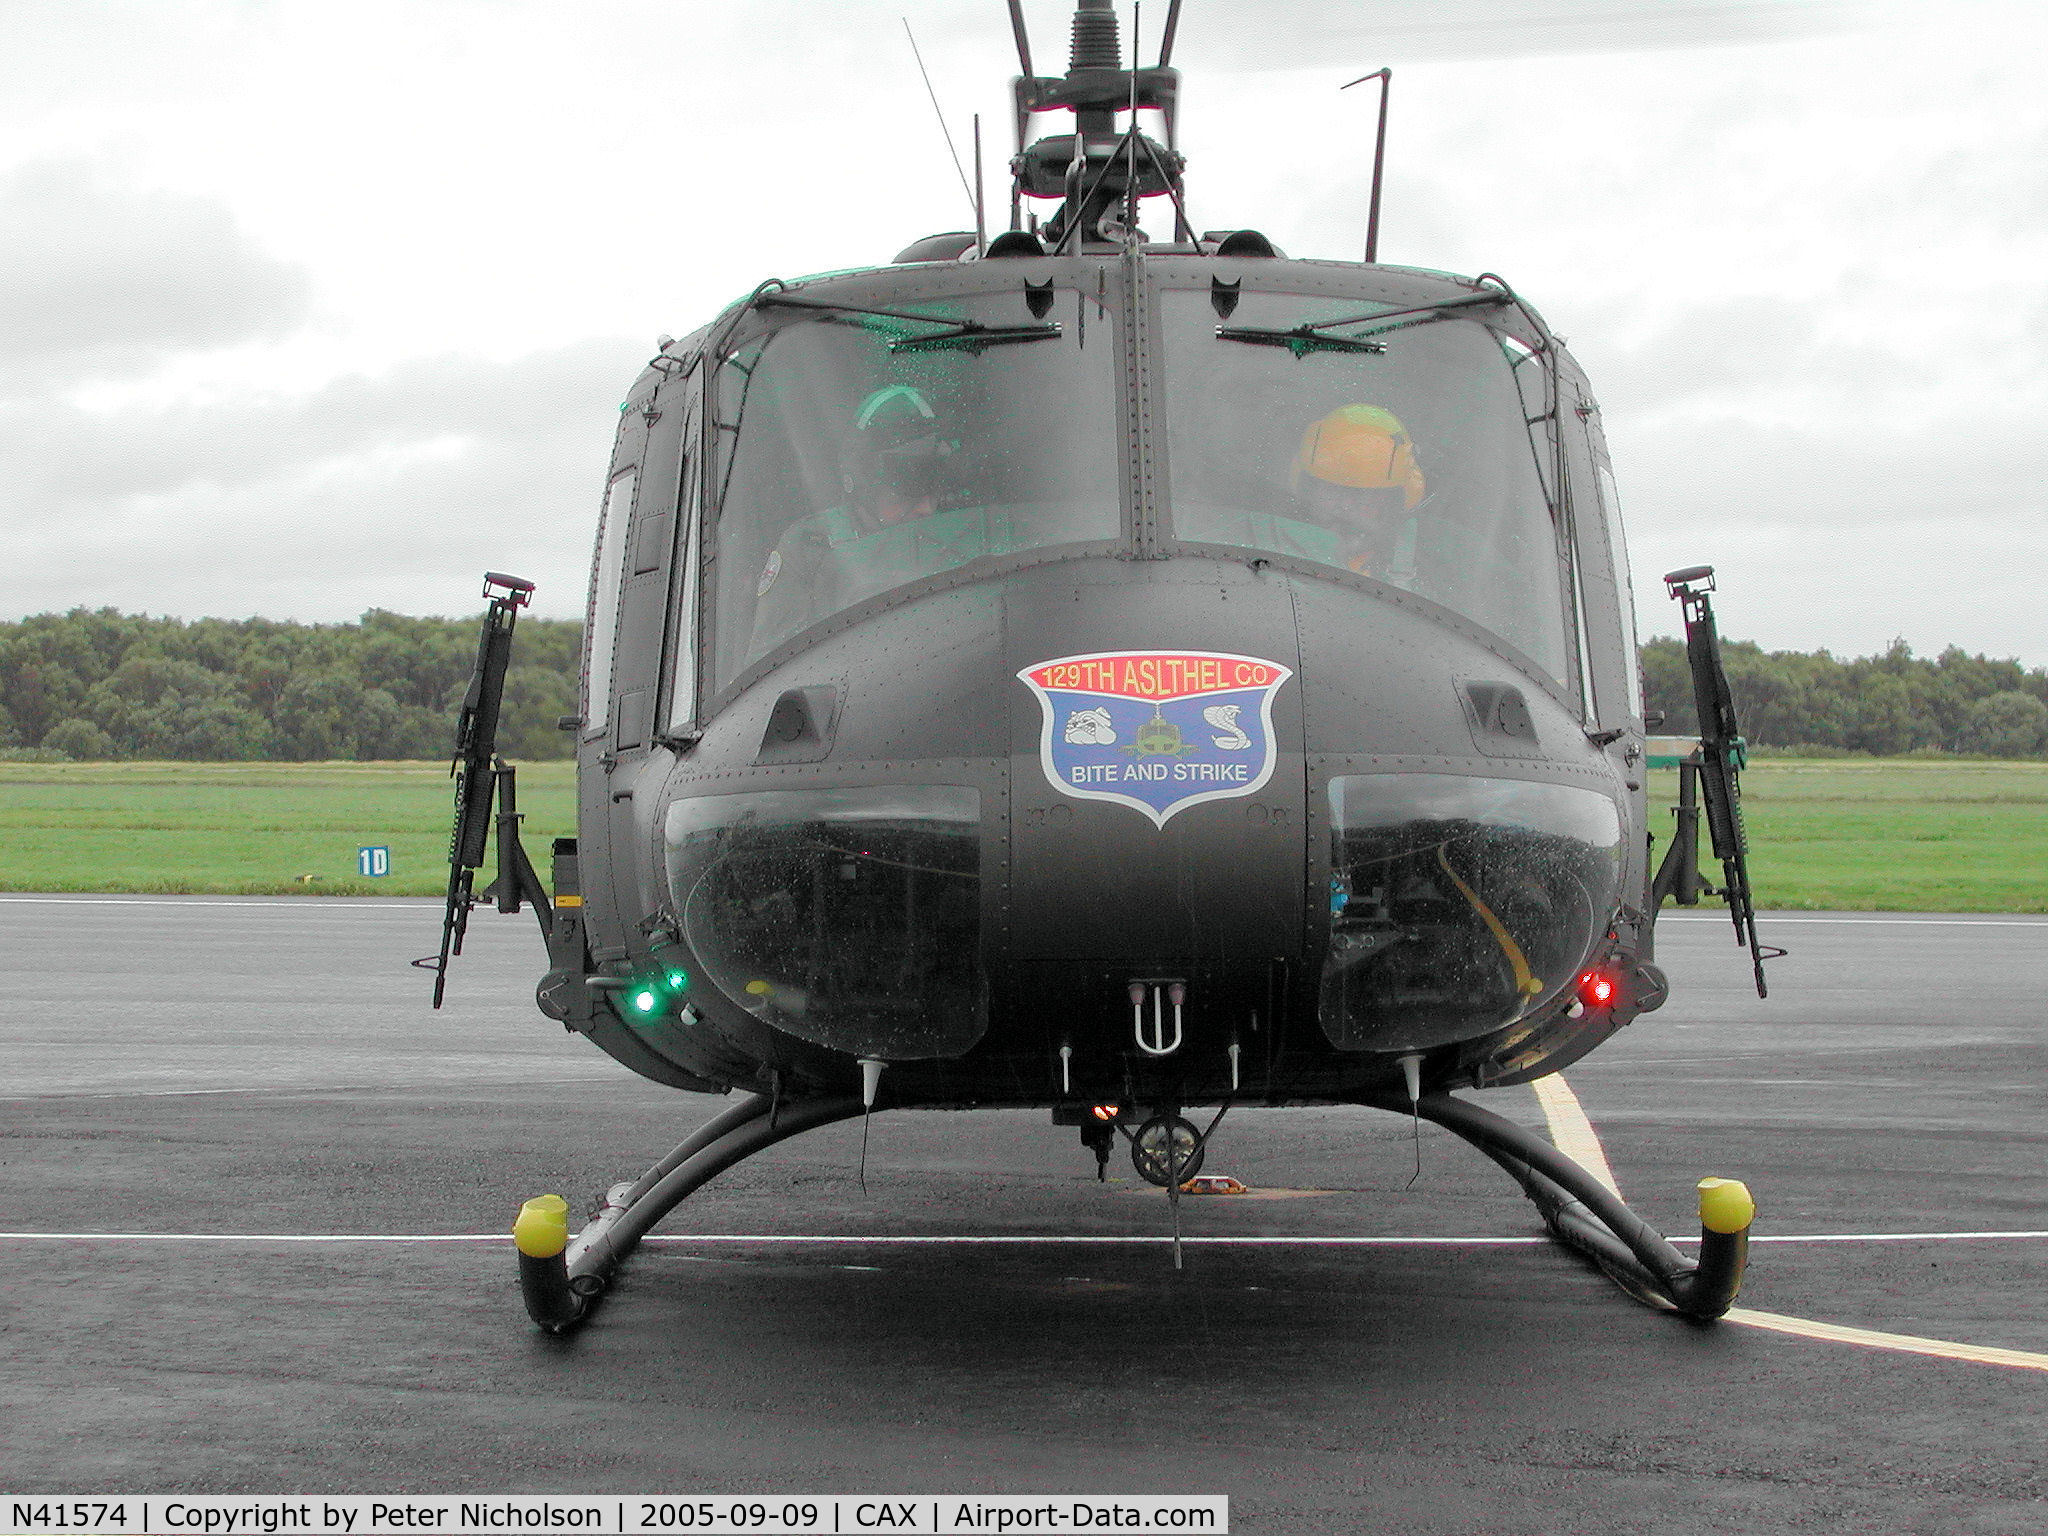 N41574, 1972 Bell UH-1H Iroquois C/N 13208, US Army markings as seen on this restored UH-1H Iroquois at Carlisle in September 2005 prior to taking up United Kingdom registration.